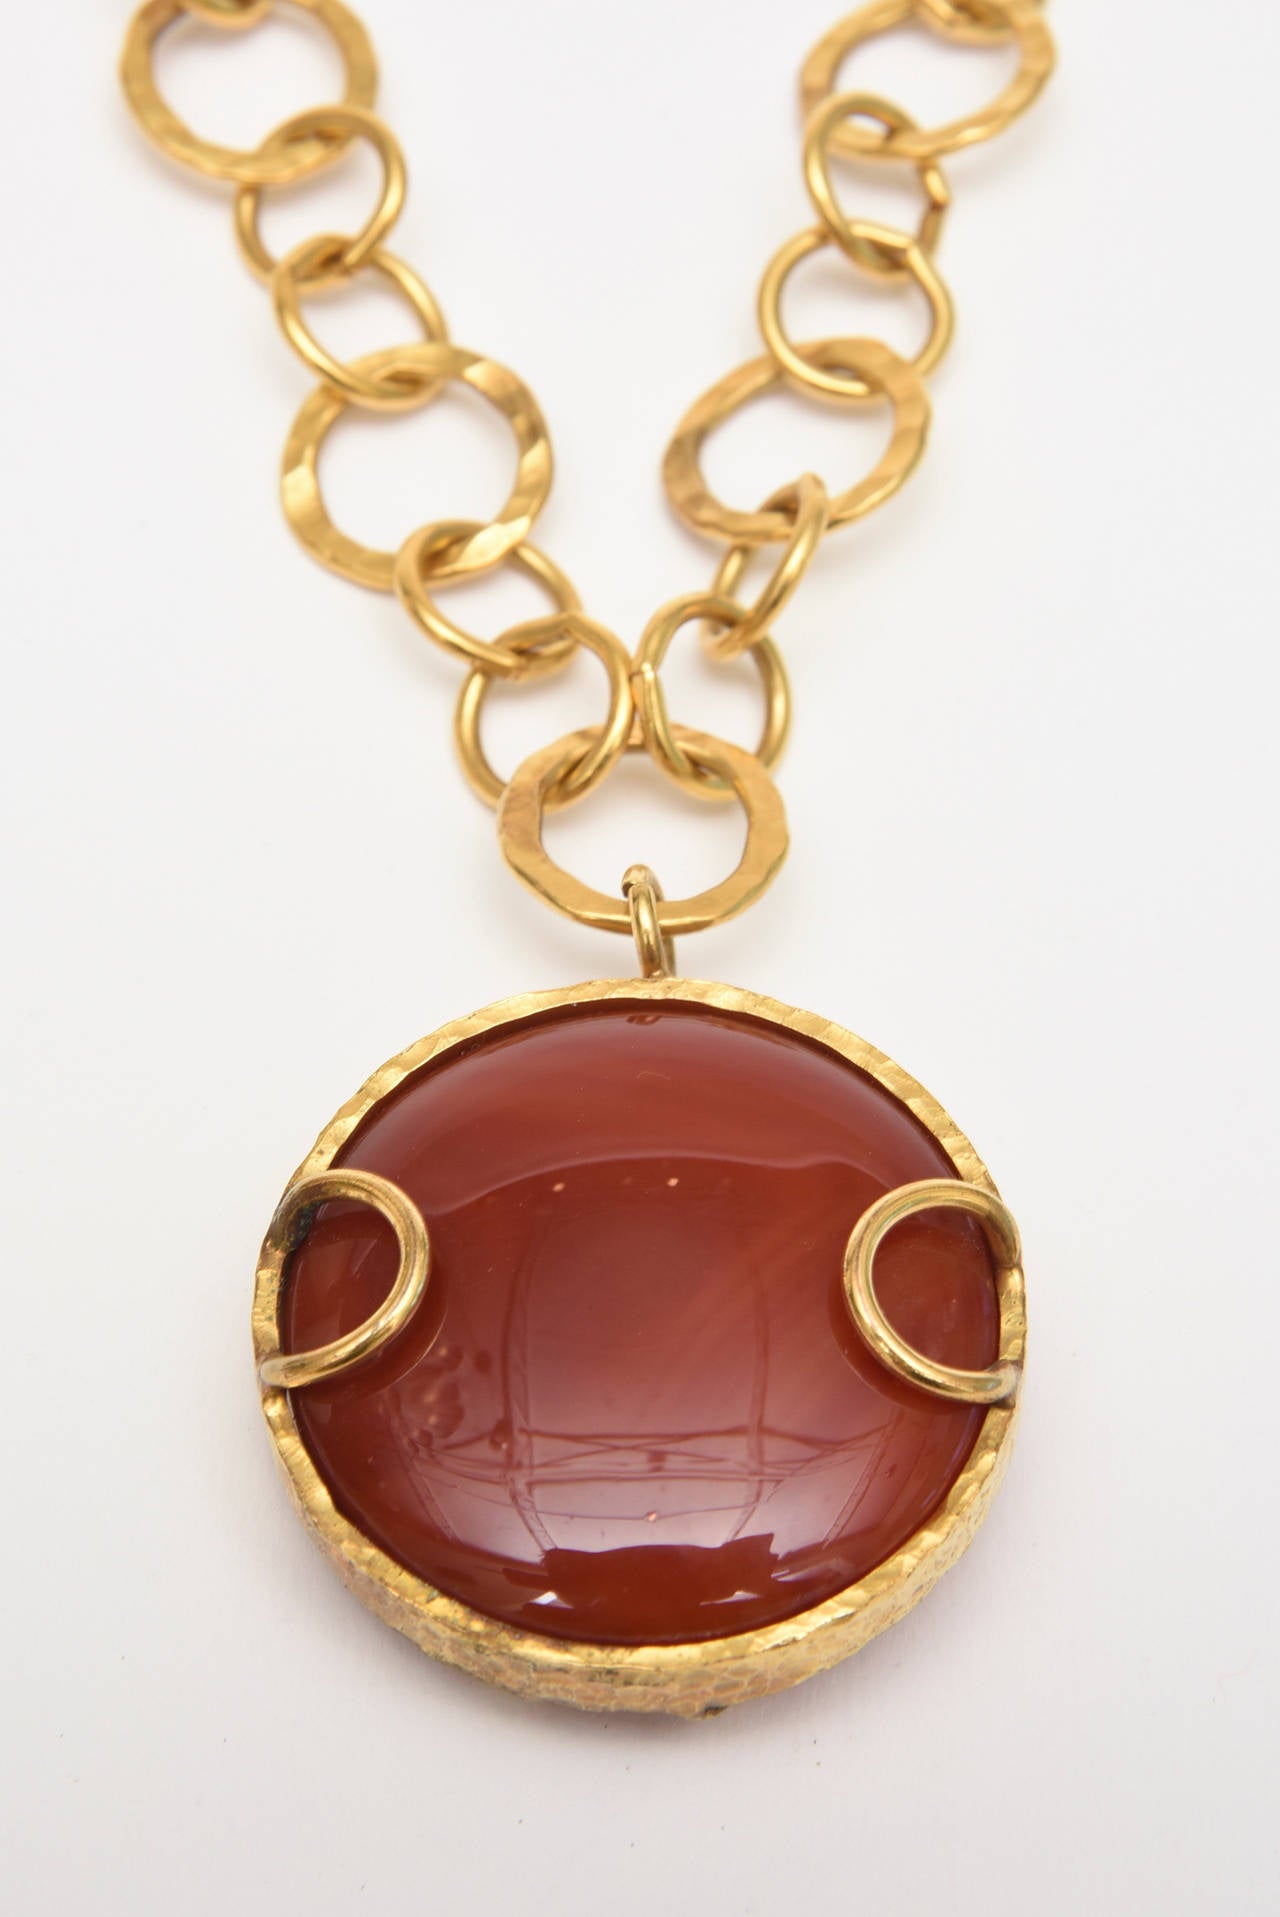 This lovely hand hammered one of a kind vintage gold plated chain link loop necklace with a big carnelian disk stone is signed Sharron Yarro. The hand crafted hand hammered detail is beautiful. It can be worn long or can be wrapped twice around for